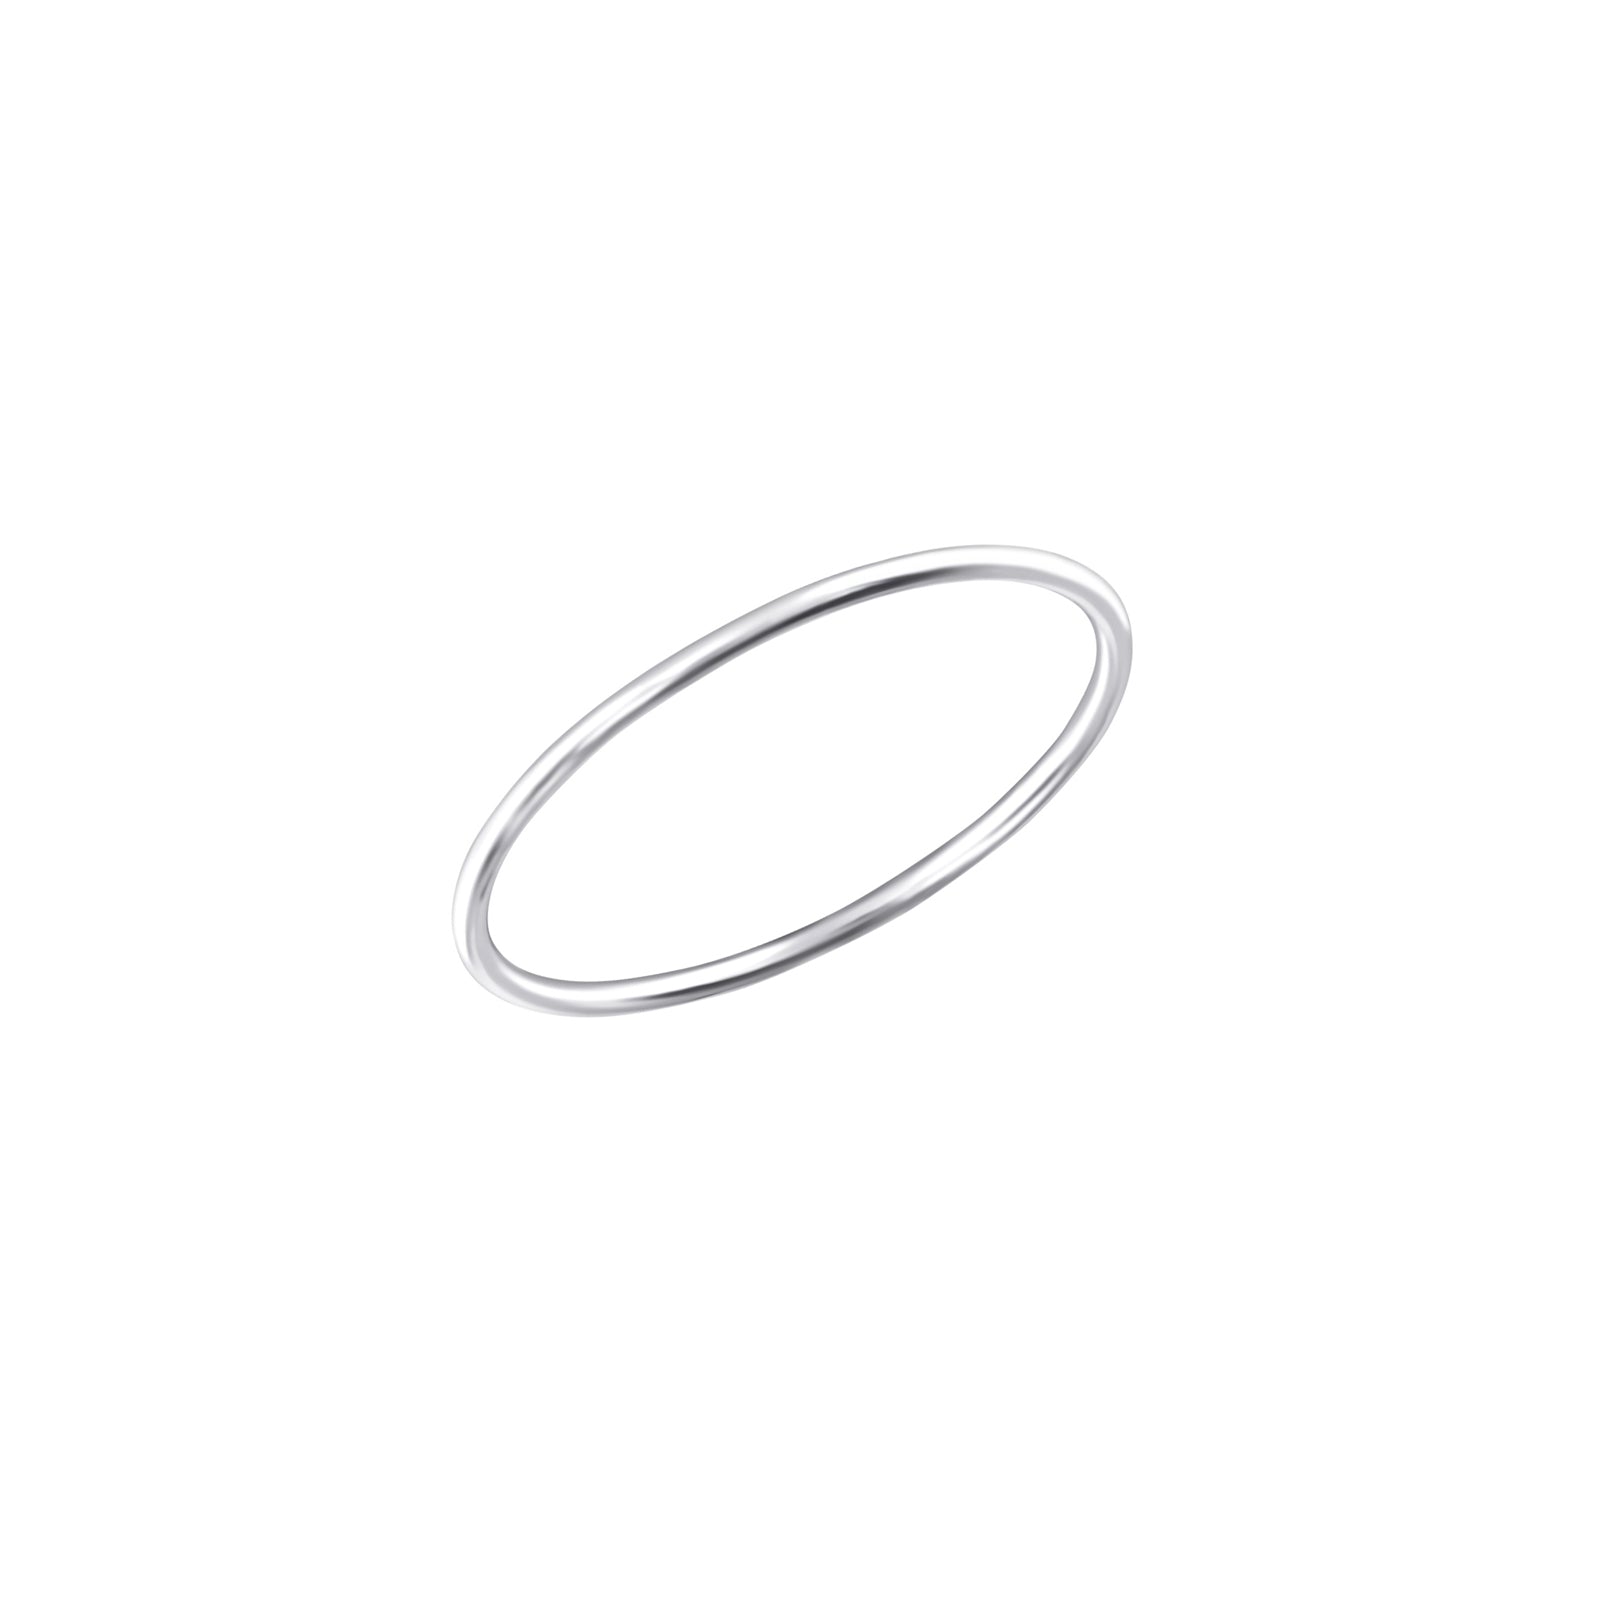 INEL MIDI SIMPLICITY ARGINT 925 rings > silver ring > simple ring > gifts for her > gifts for girls > gifts for moms > gifts for best friend > birthday gift Maison la Stephanie   